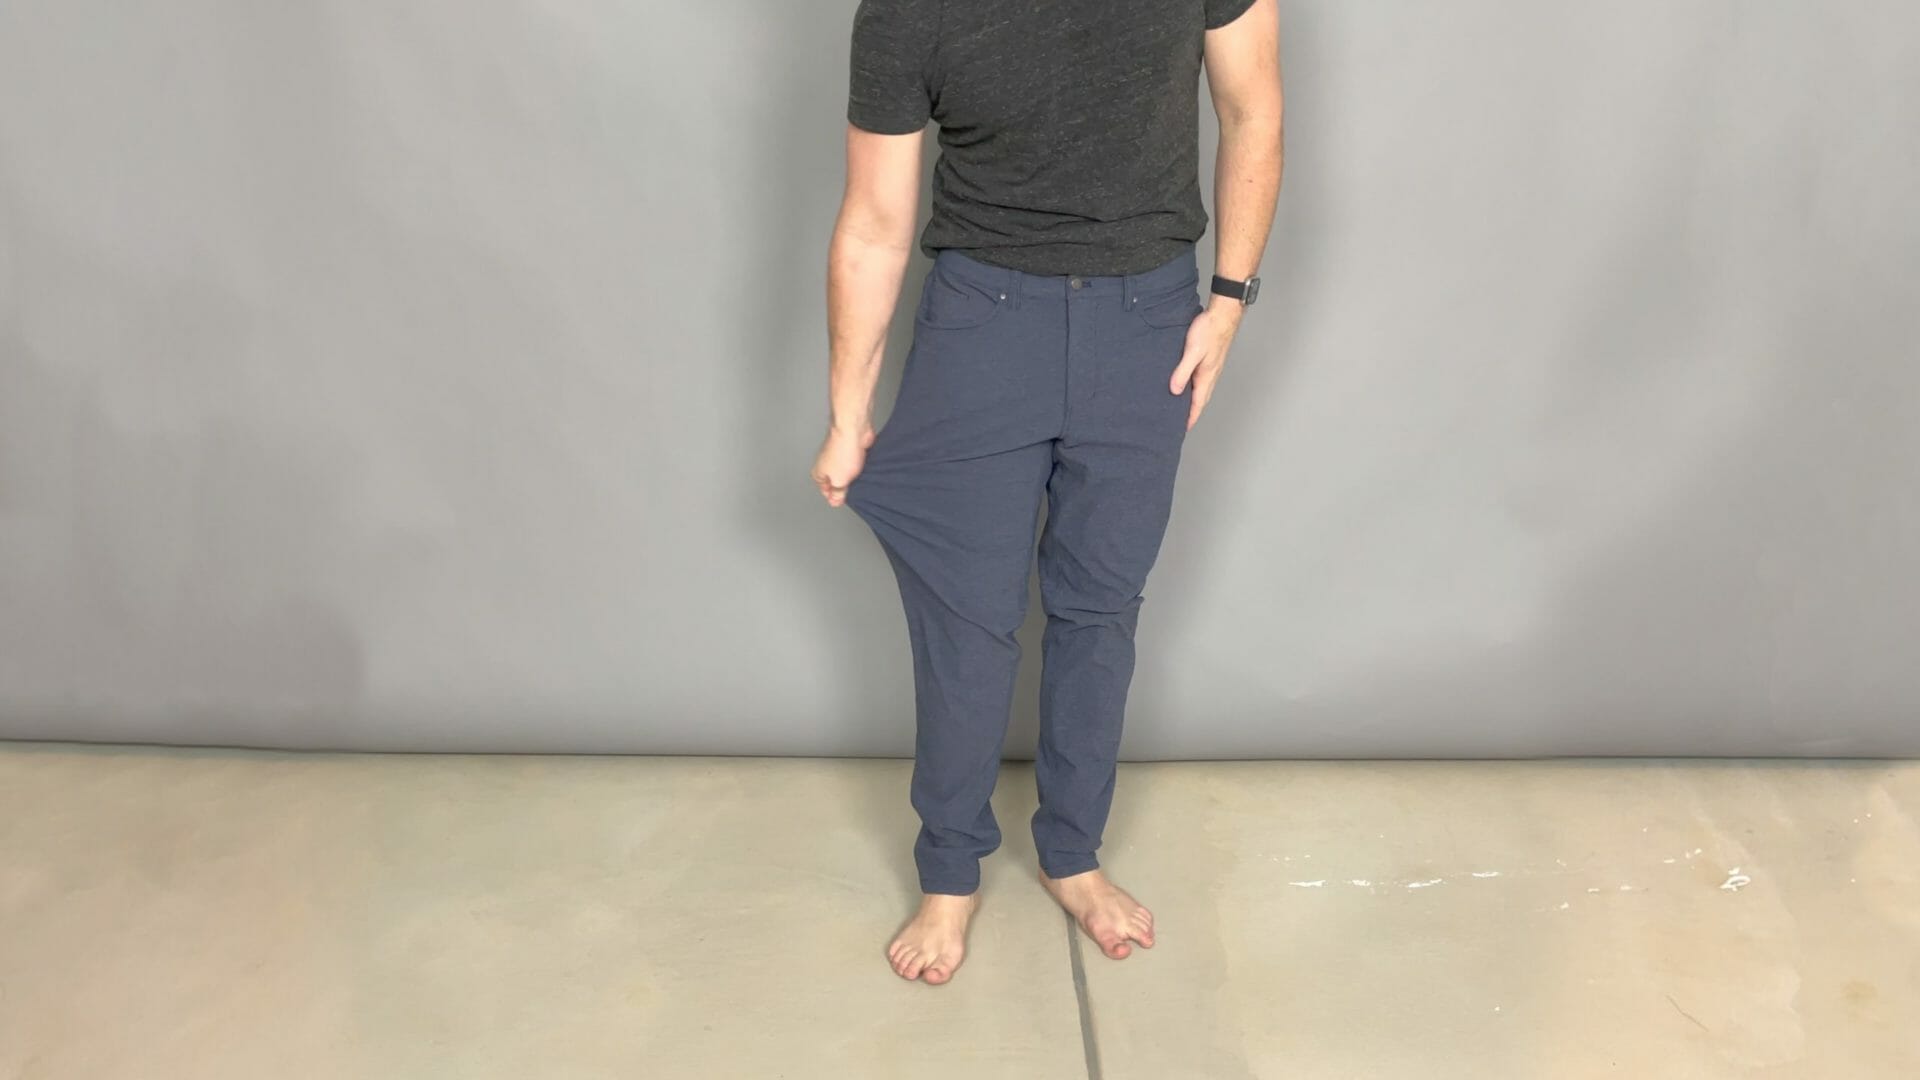 Lululemon "Jeans" are Here: Lululemon Tech Canvas Review 4